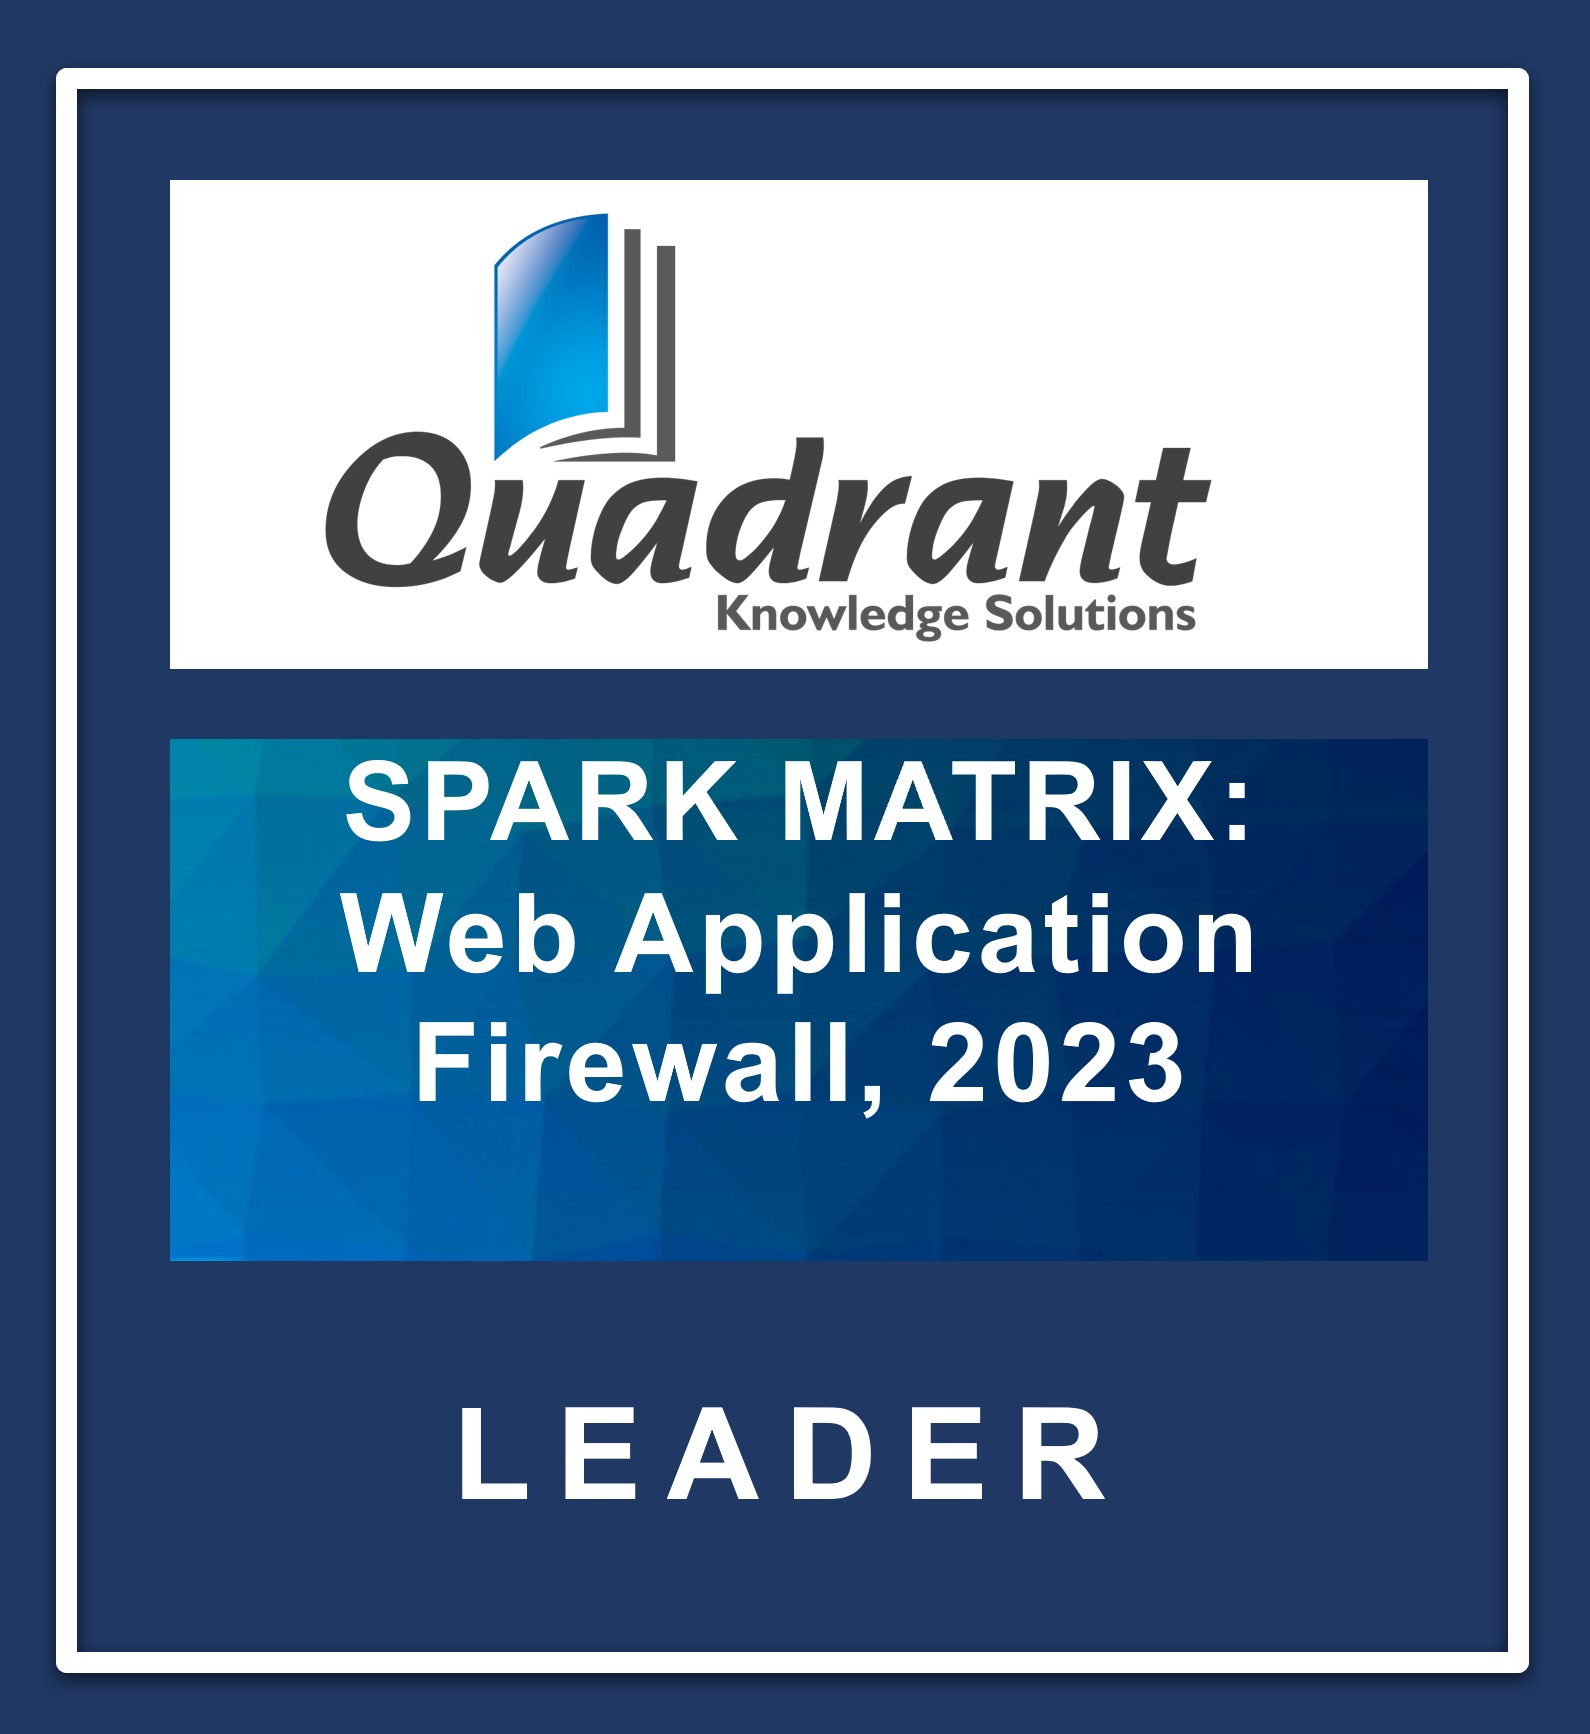 Read the 2022 SPARK Matrix™ for Web Application Firewall